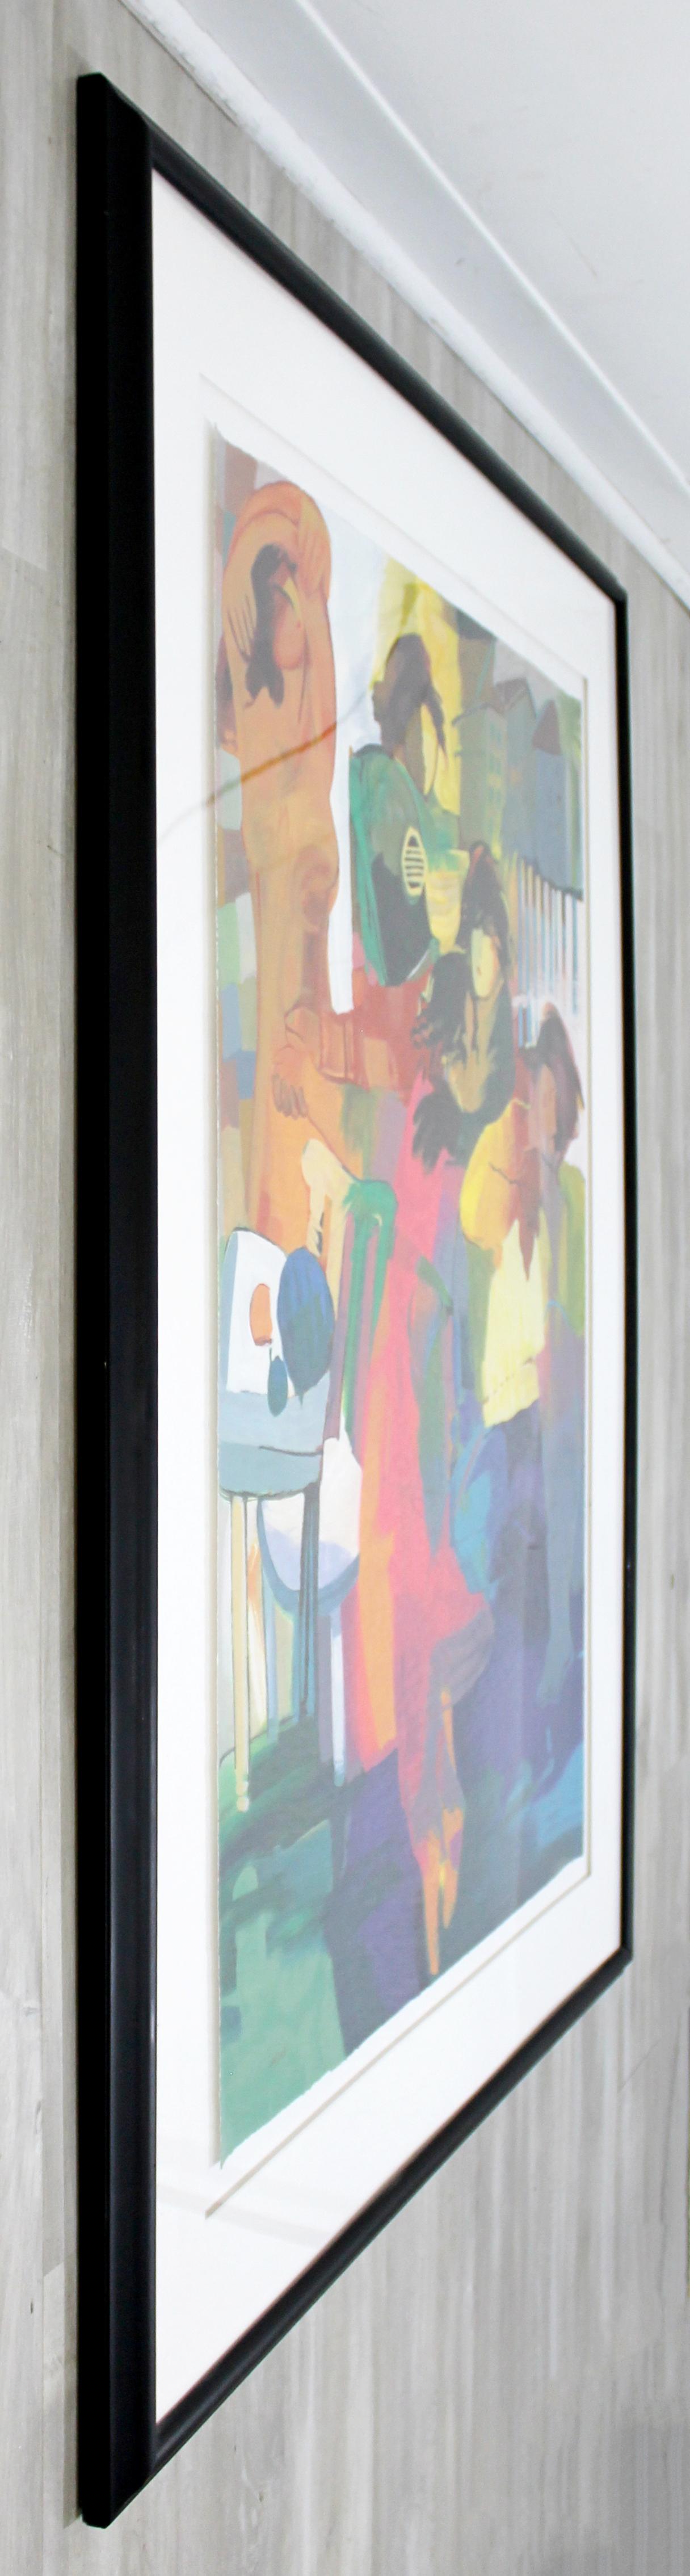 Contemporary Framed Lithograph by Hessam Abrishami Cherish the Day 200/295 In Good Condition For Sale In Keego Harbor, MI